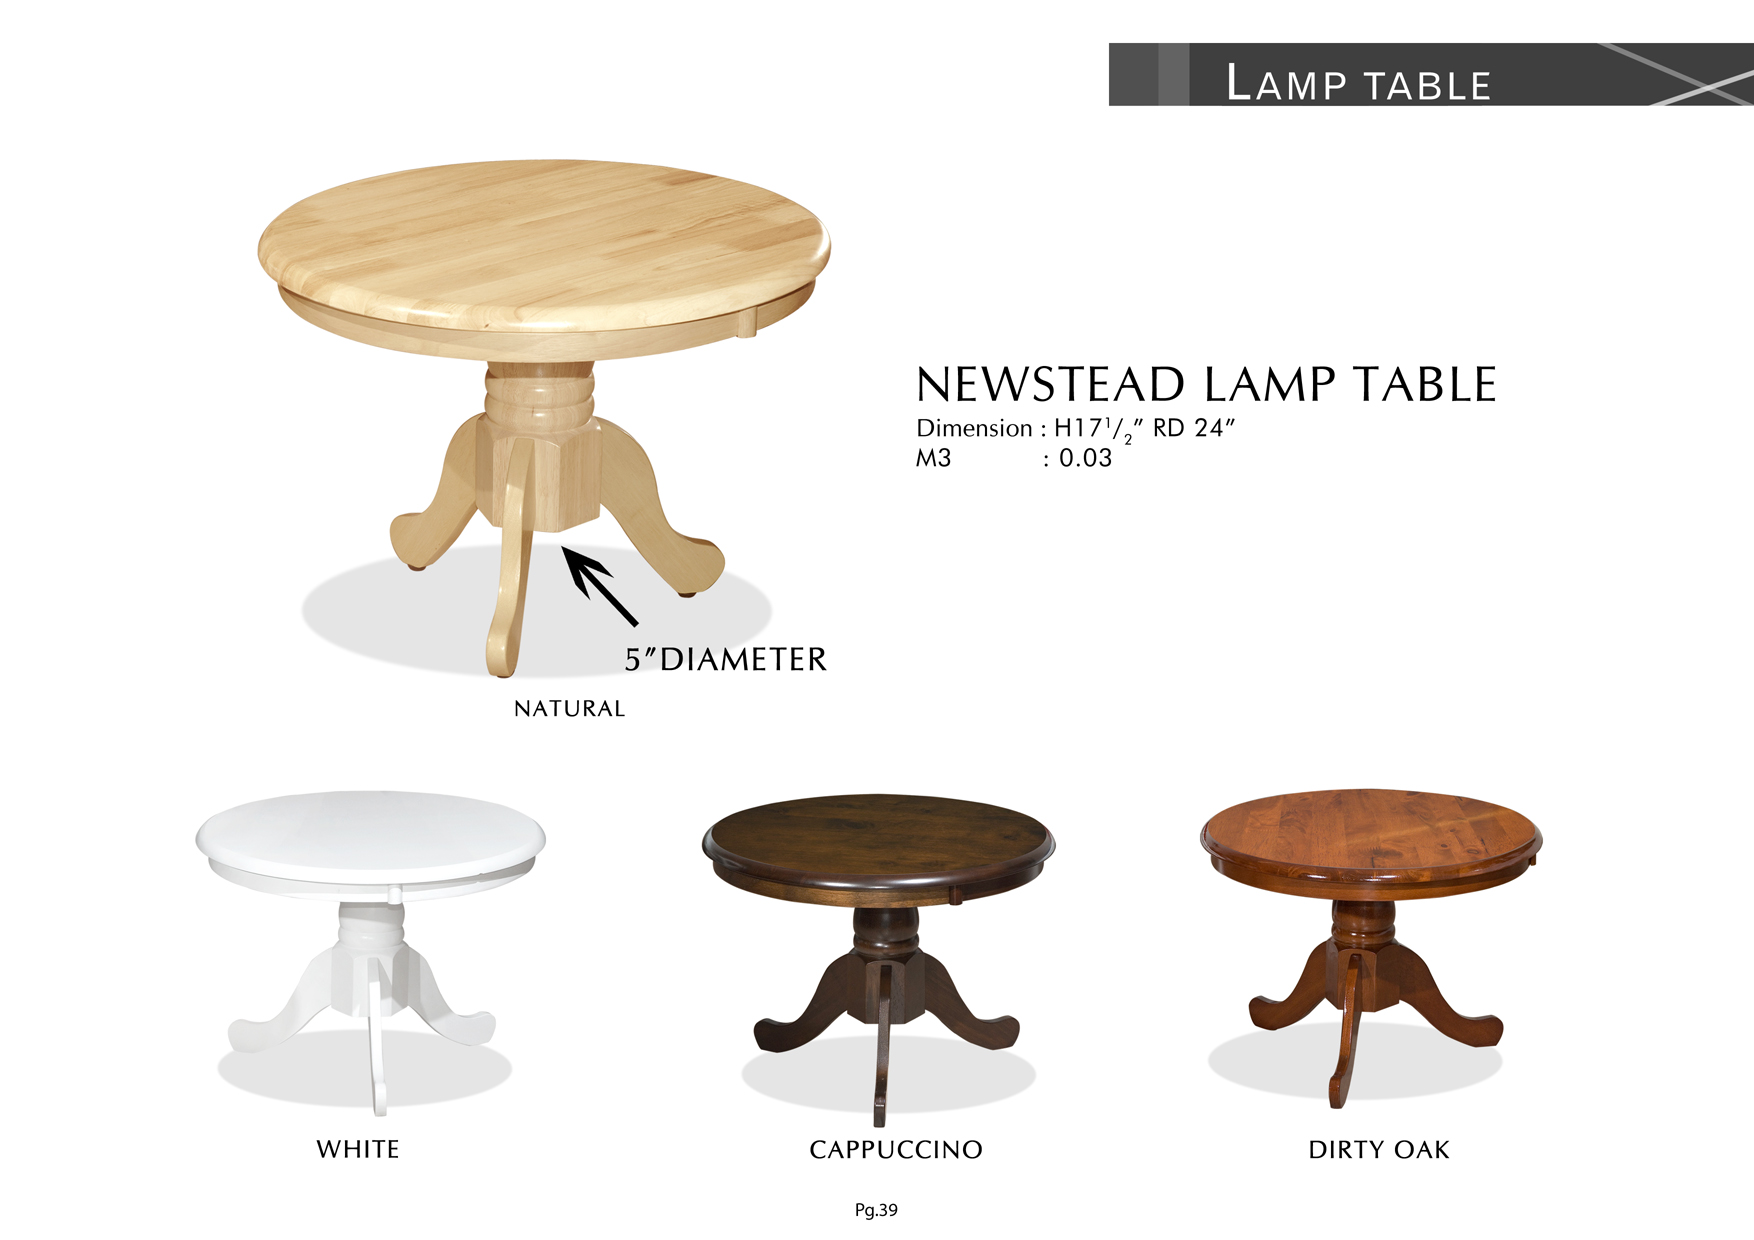 Product: PG39. NEWSTEAD LAMP TABLE